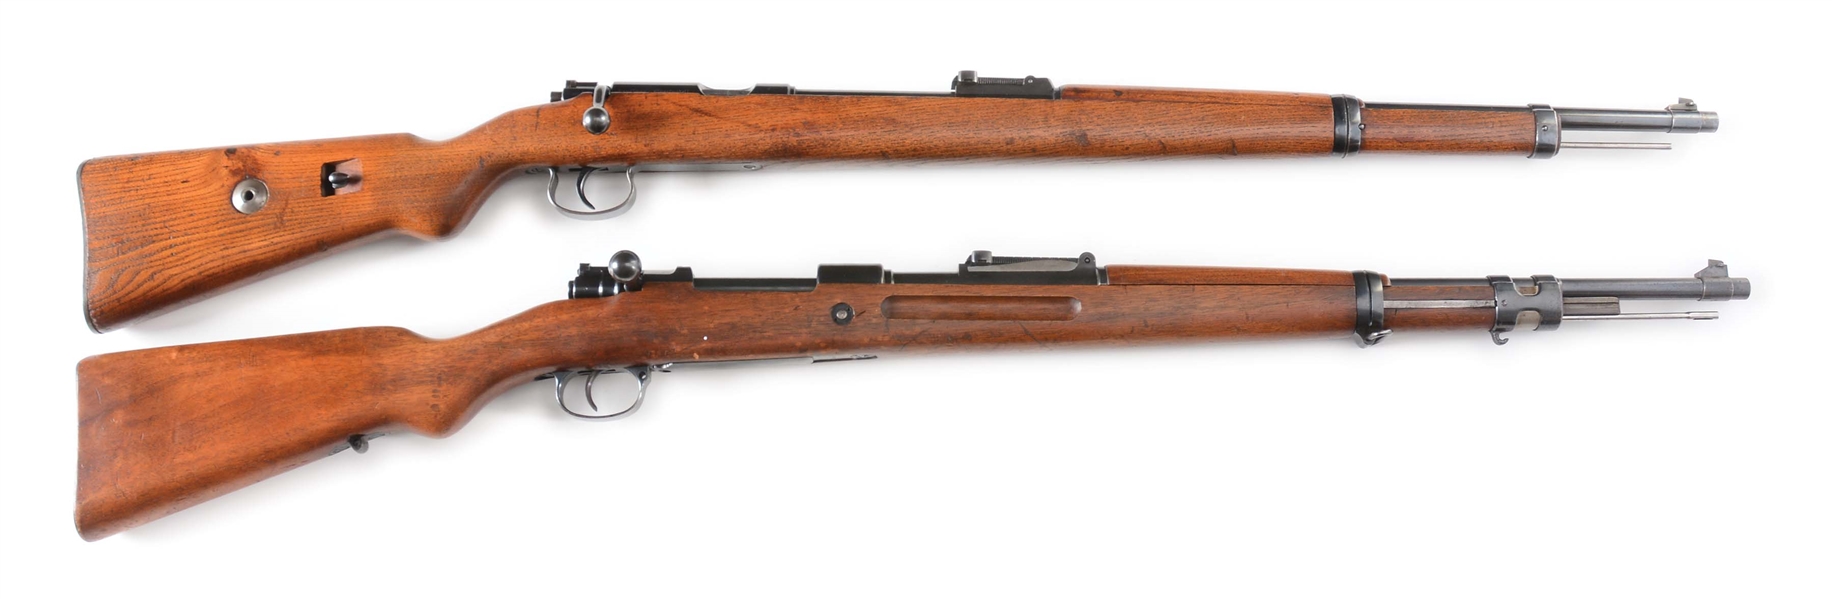 (C) LOT OF TWO: BANNER MAUSER GERMAN DEUTSCHES SPORTMODELL .22 TRAINING RIFLE AND A STANDARD-MODELL BANNER MAUSER 98 RIFLE.